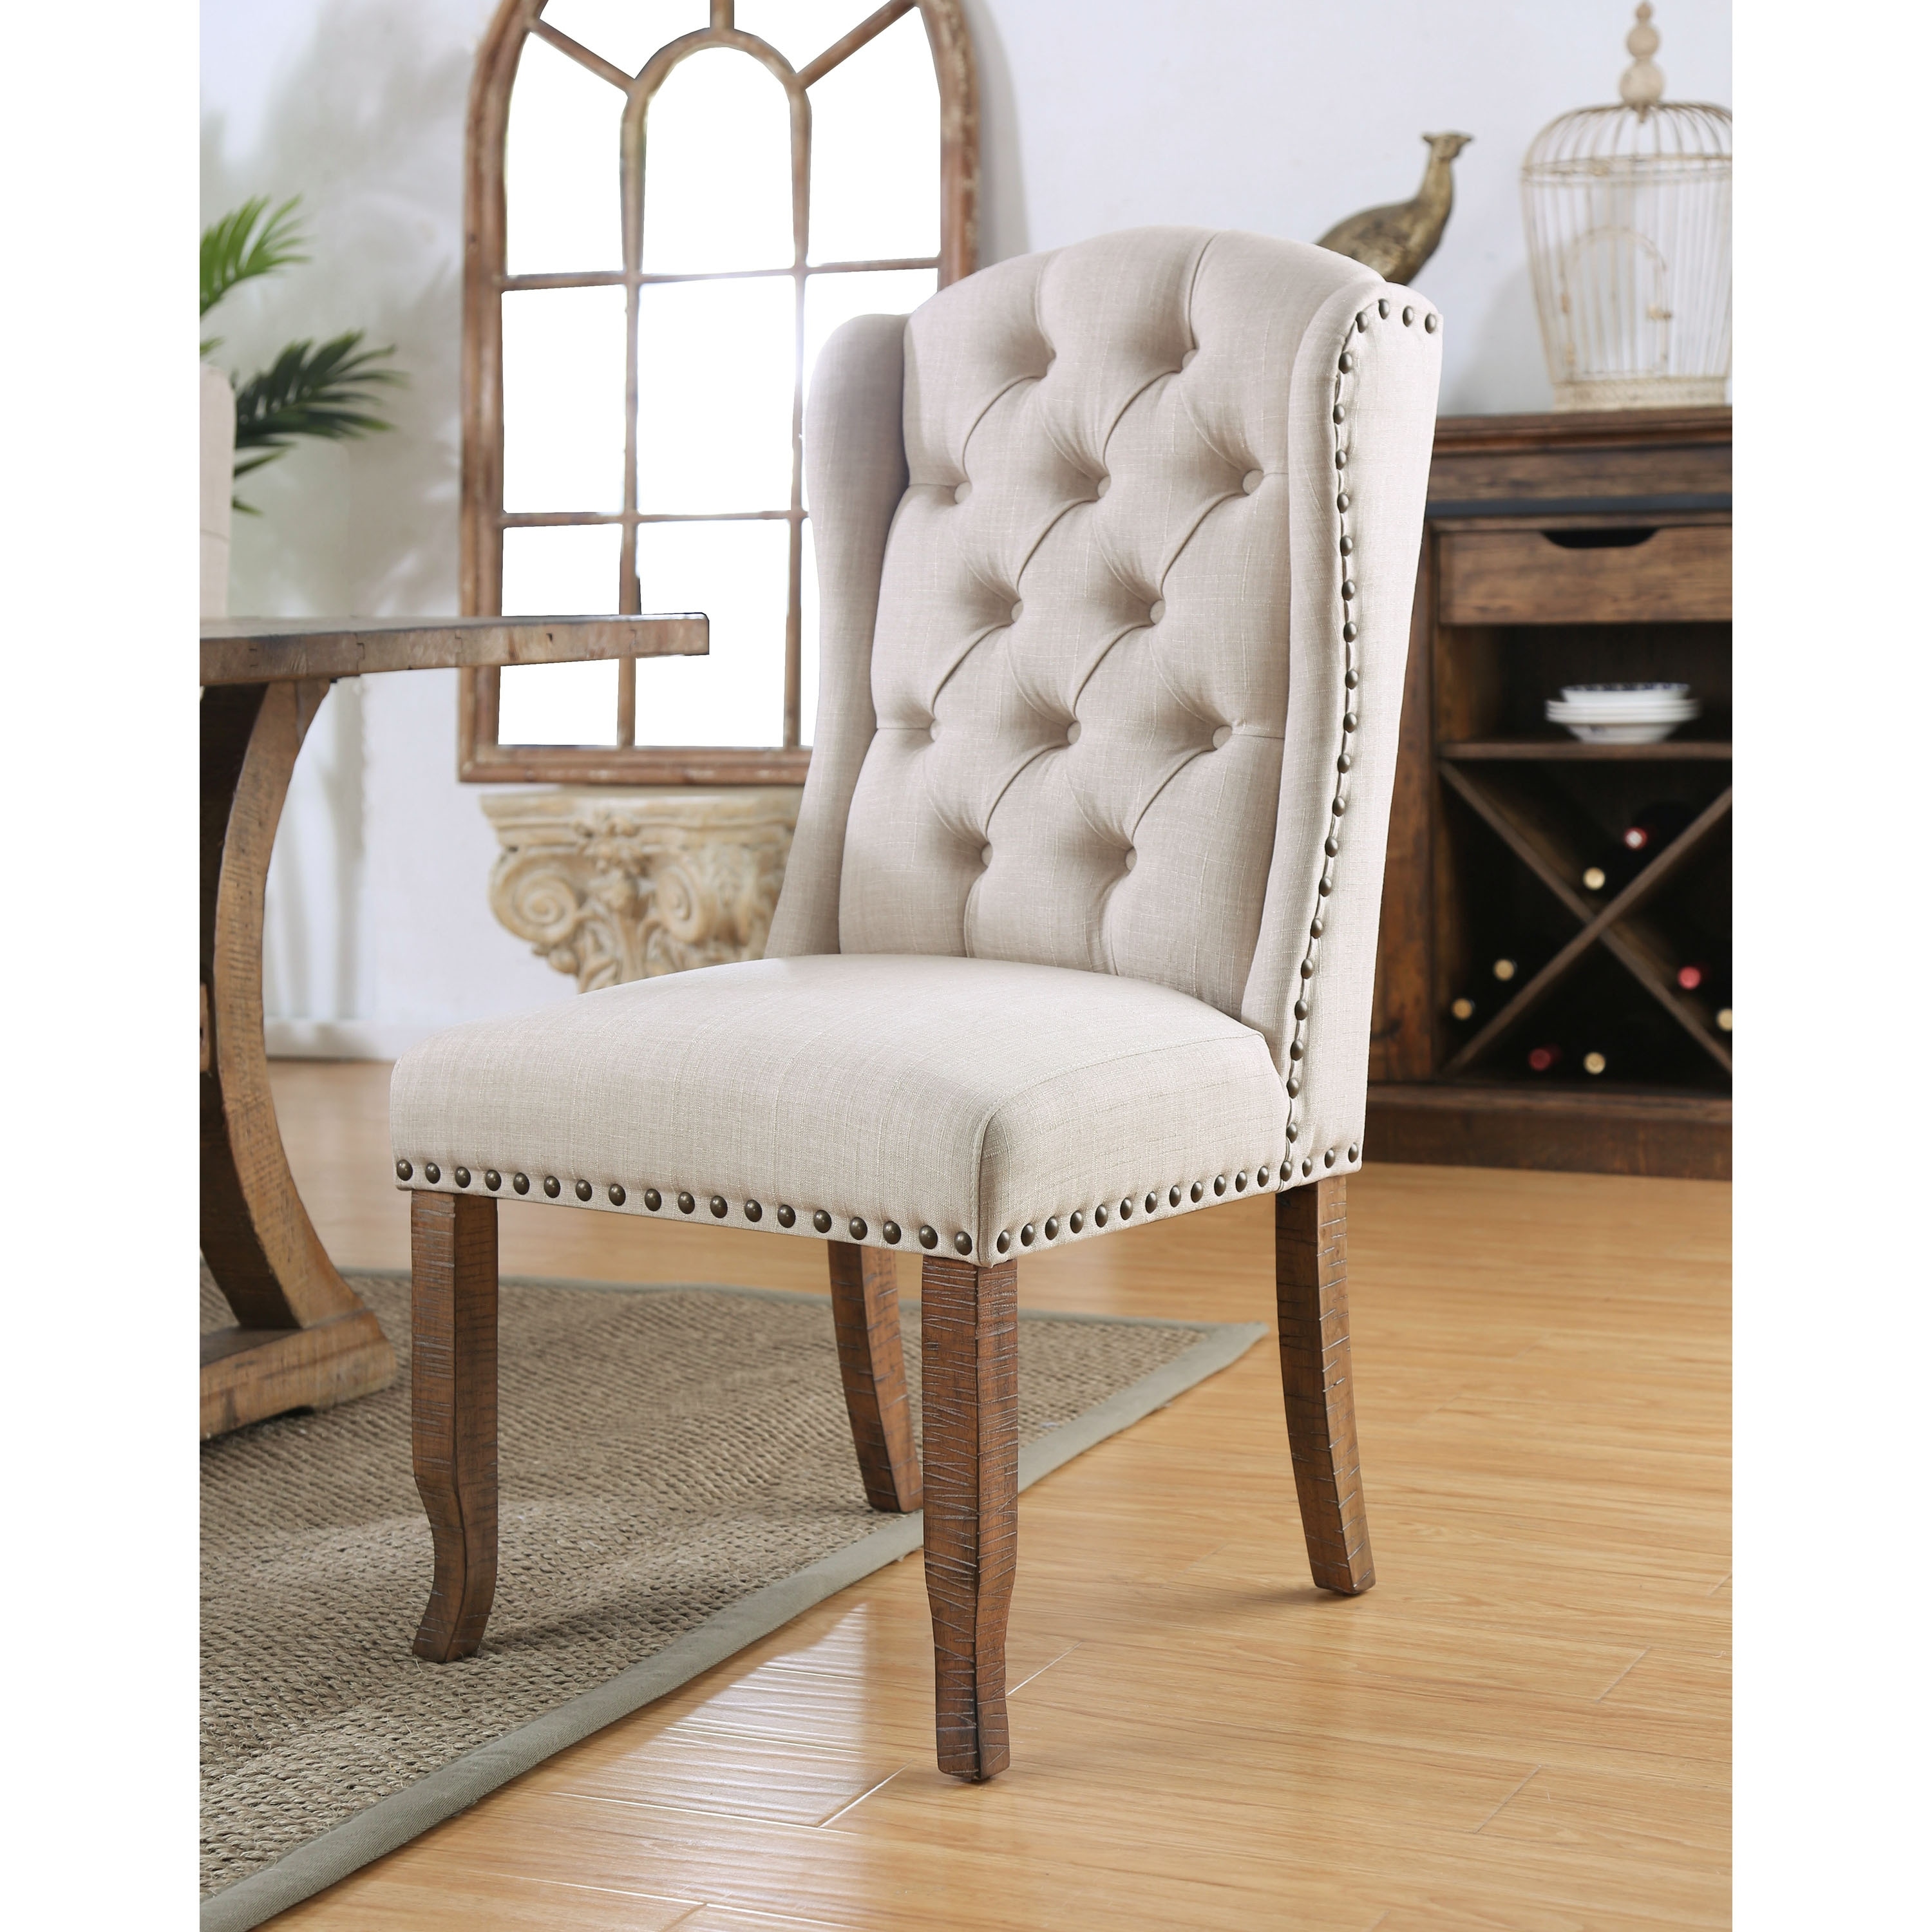 Wood Dining Chairs Price In Pakistan - Best Design Idea